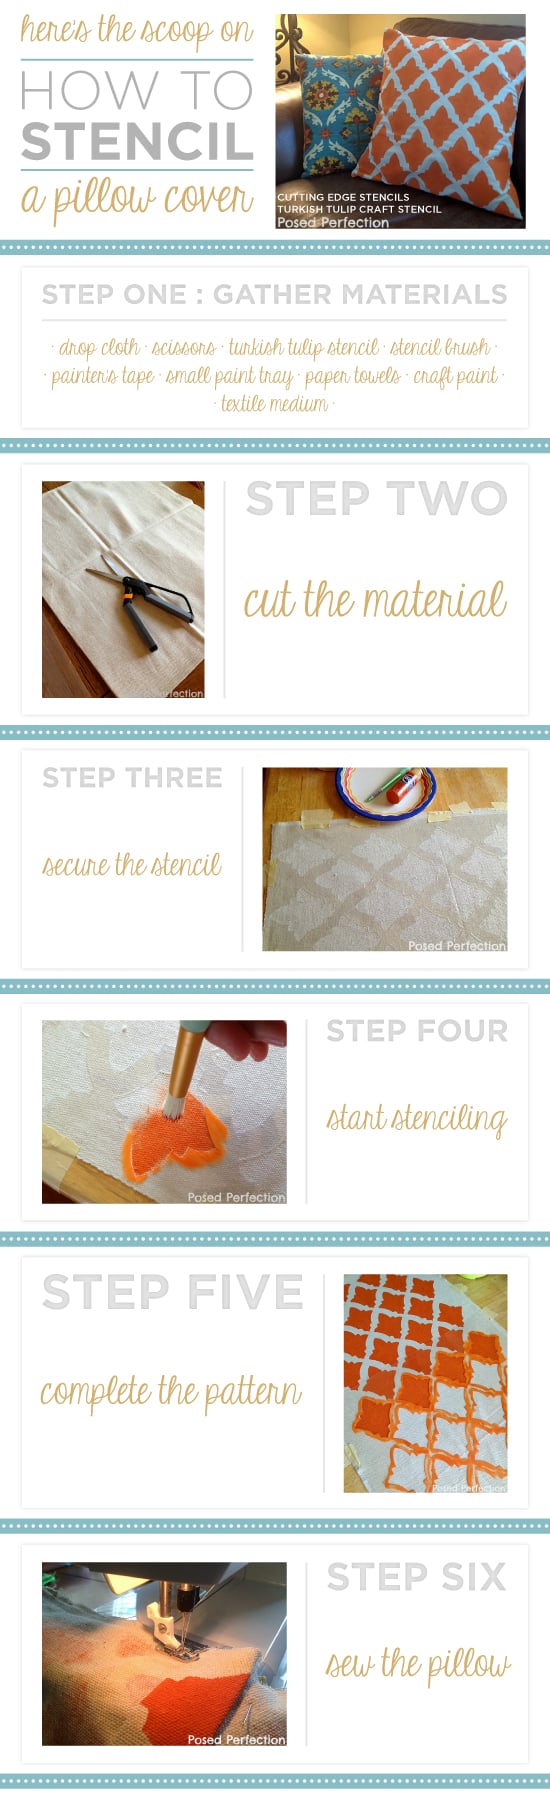 Here's the scoop on how to stencil a pillow cover using the Nagoya Stencil from Cutting Edge Stencils! http://www.cuttingedgestencils.com/nagoya-furniture-stencil.html